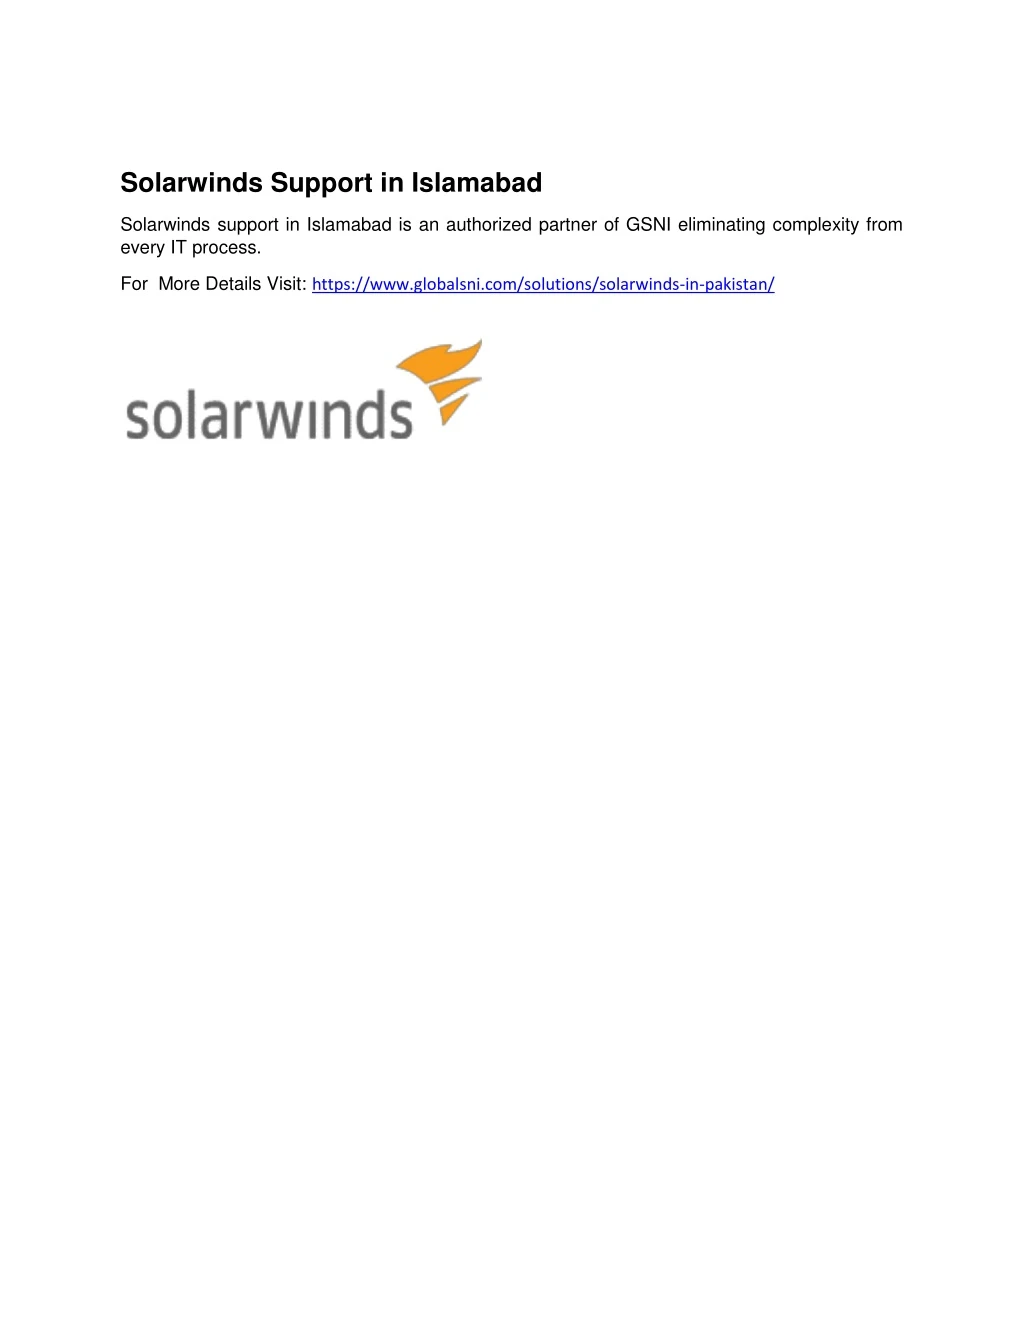 solarwinds support in islamabad